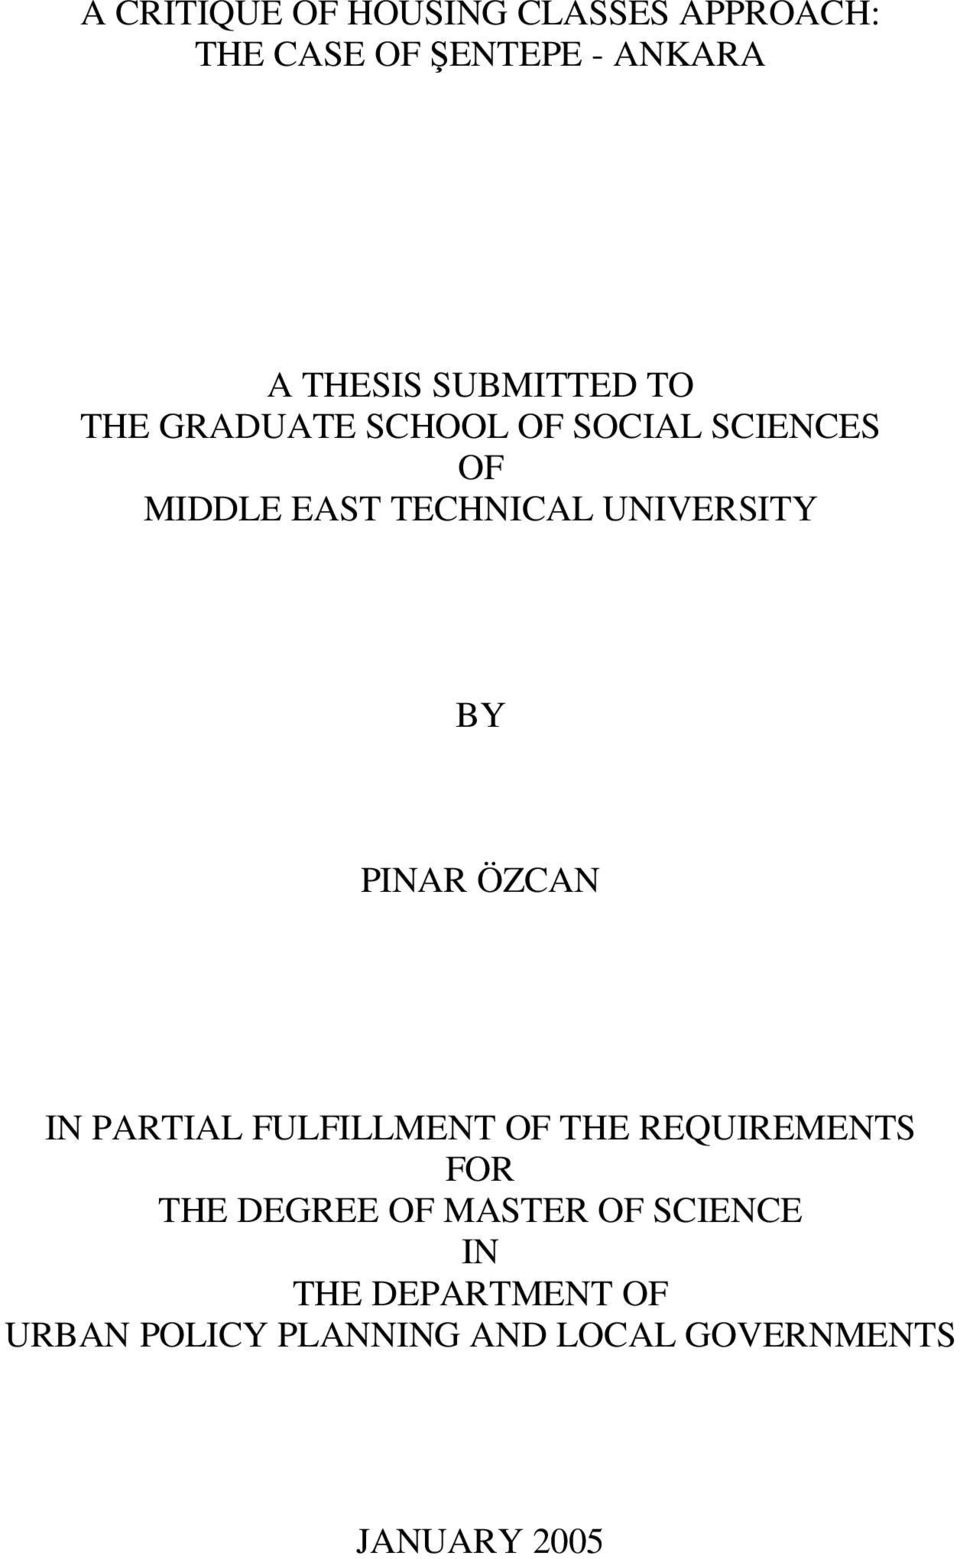 UNIVERSITY BY PINAR ÖZCAN IN PARTIAL FULFILLMENT OF THE REQUIREMENTS FOR THE DEGREE